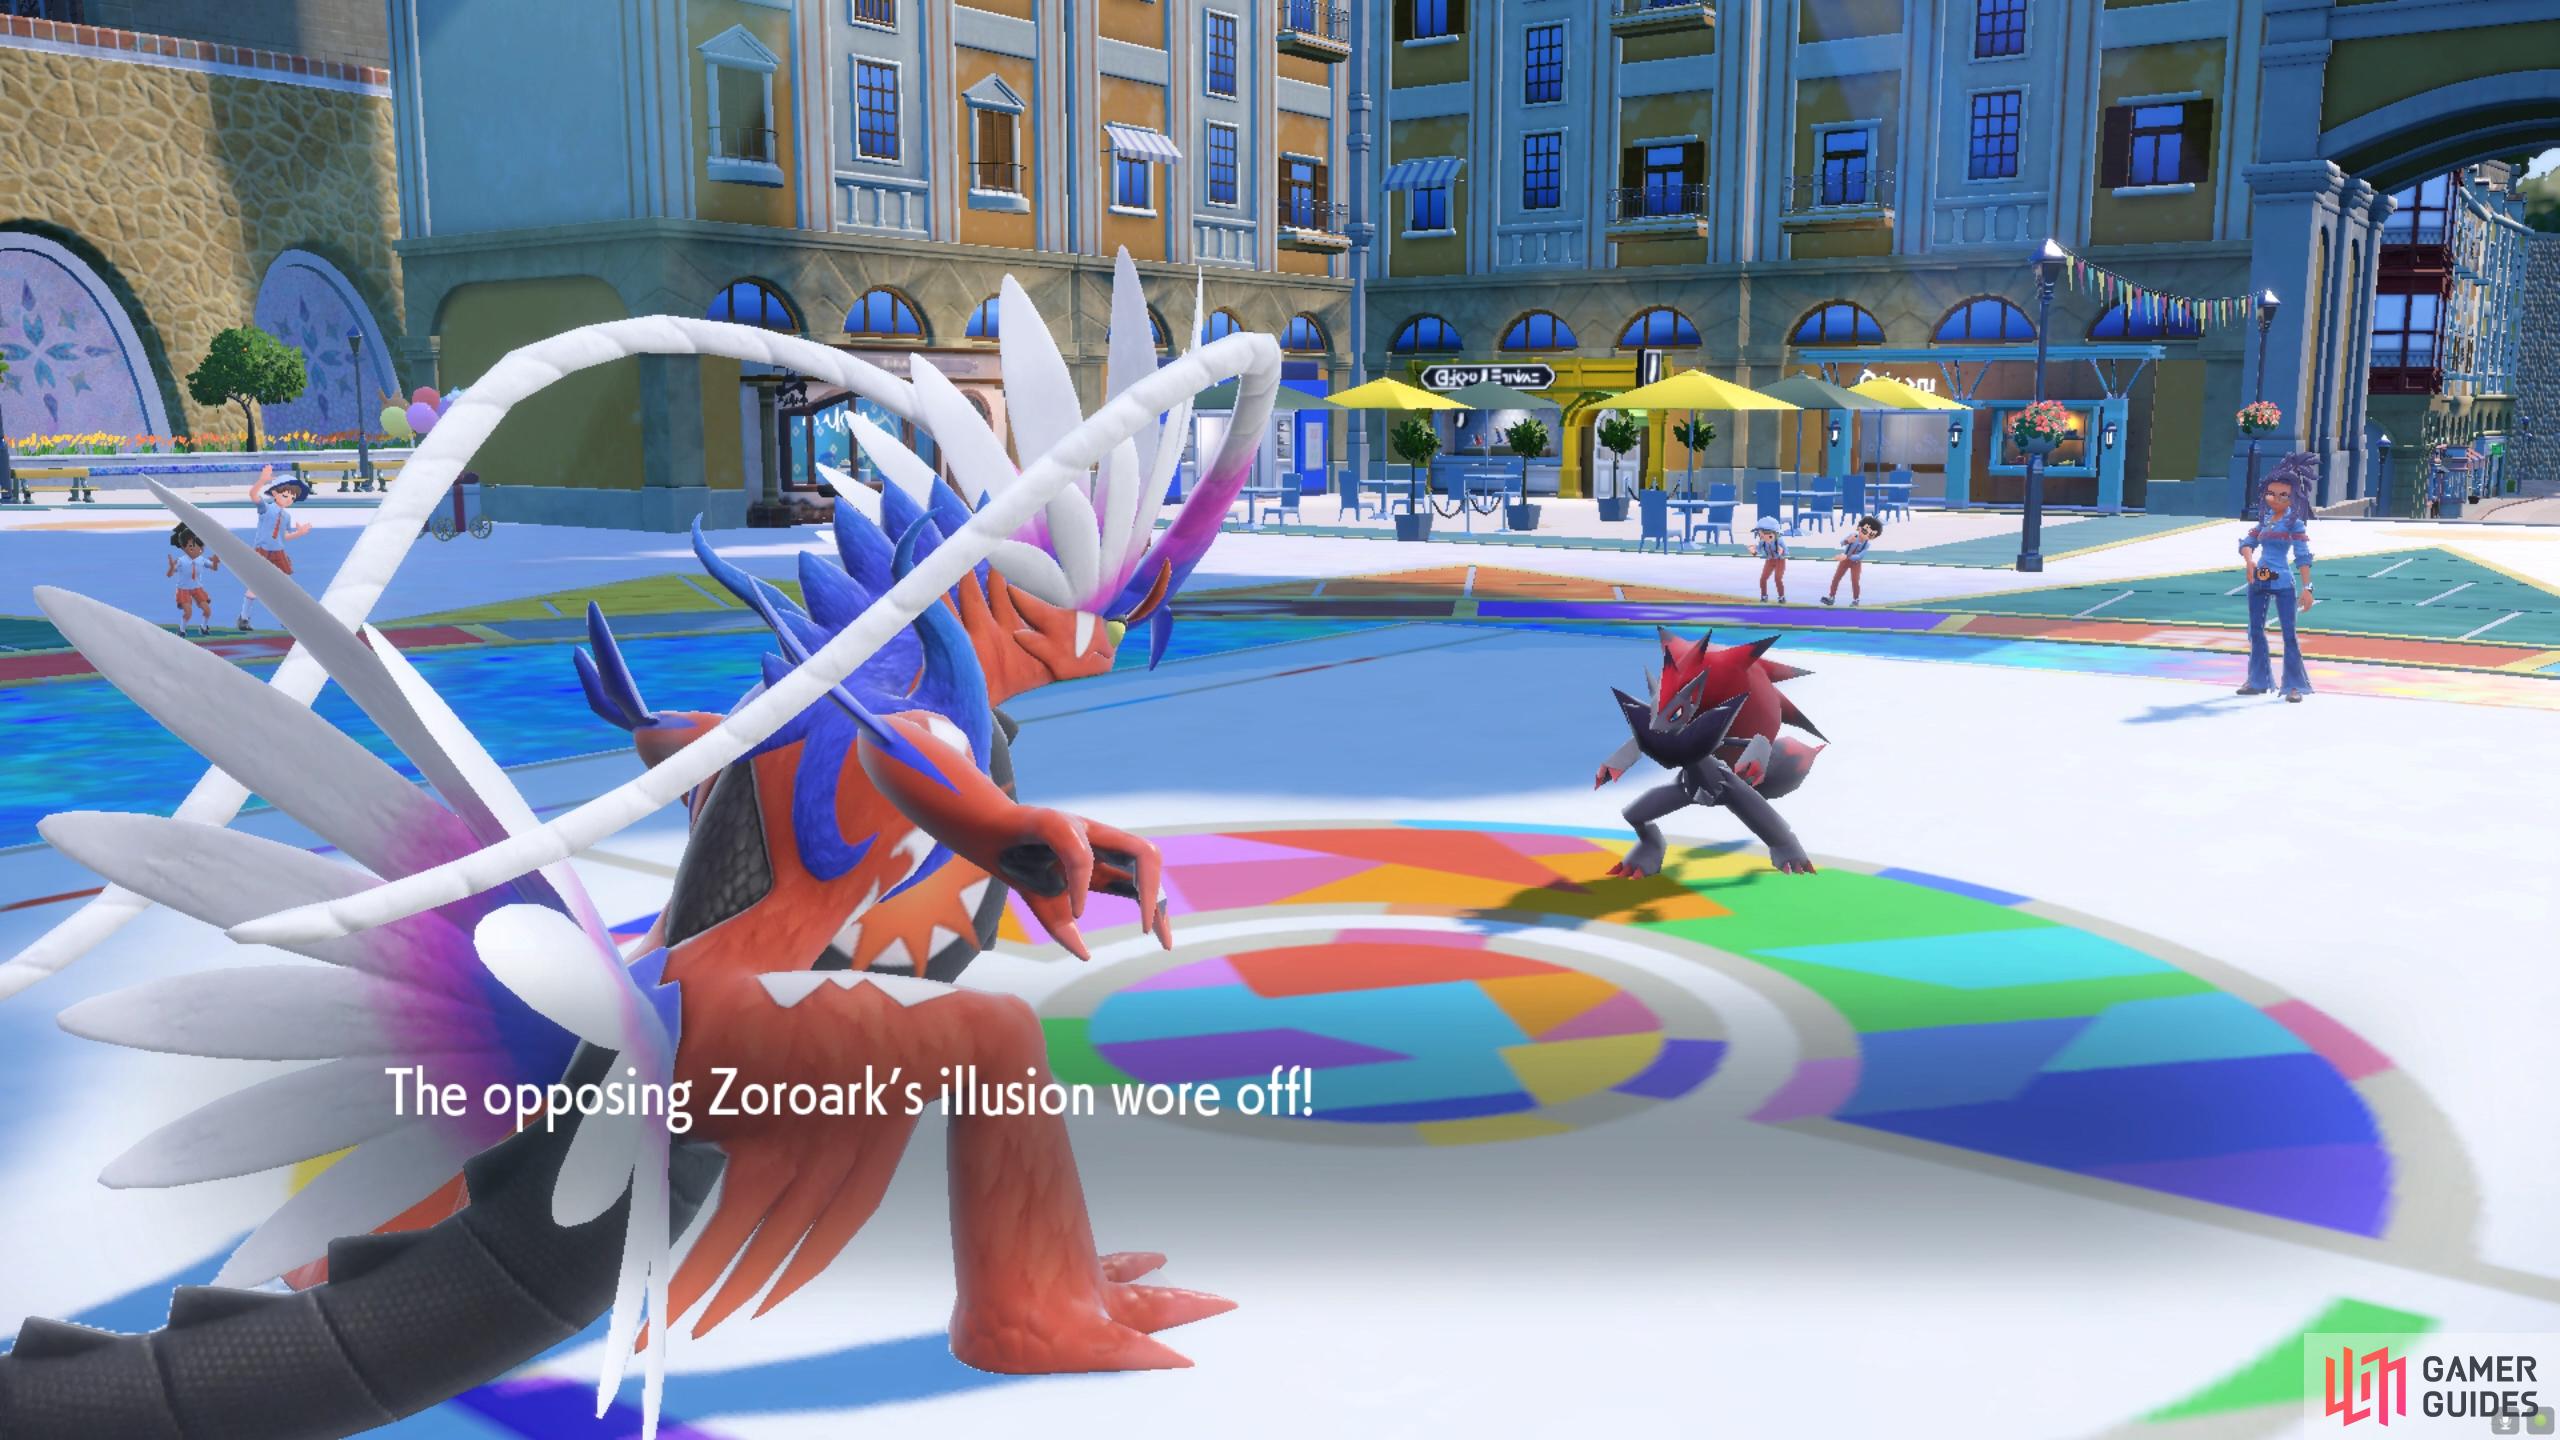 Zoroark will take on the appearance of the last Pokémon in its party.